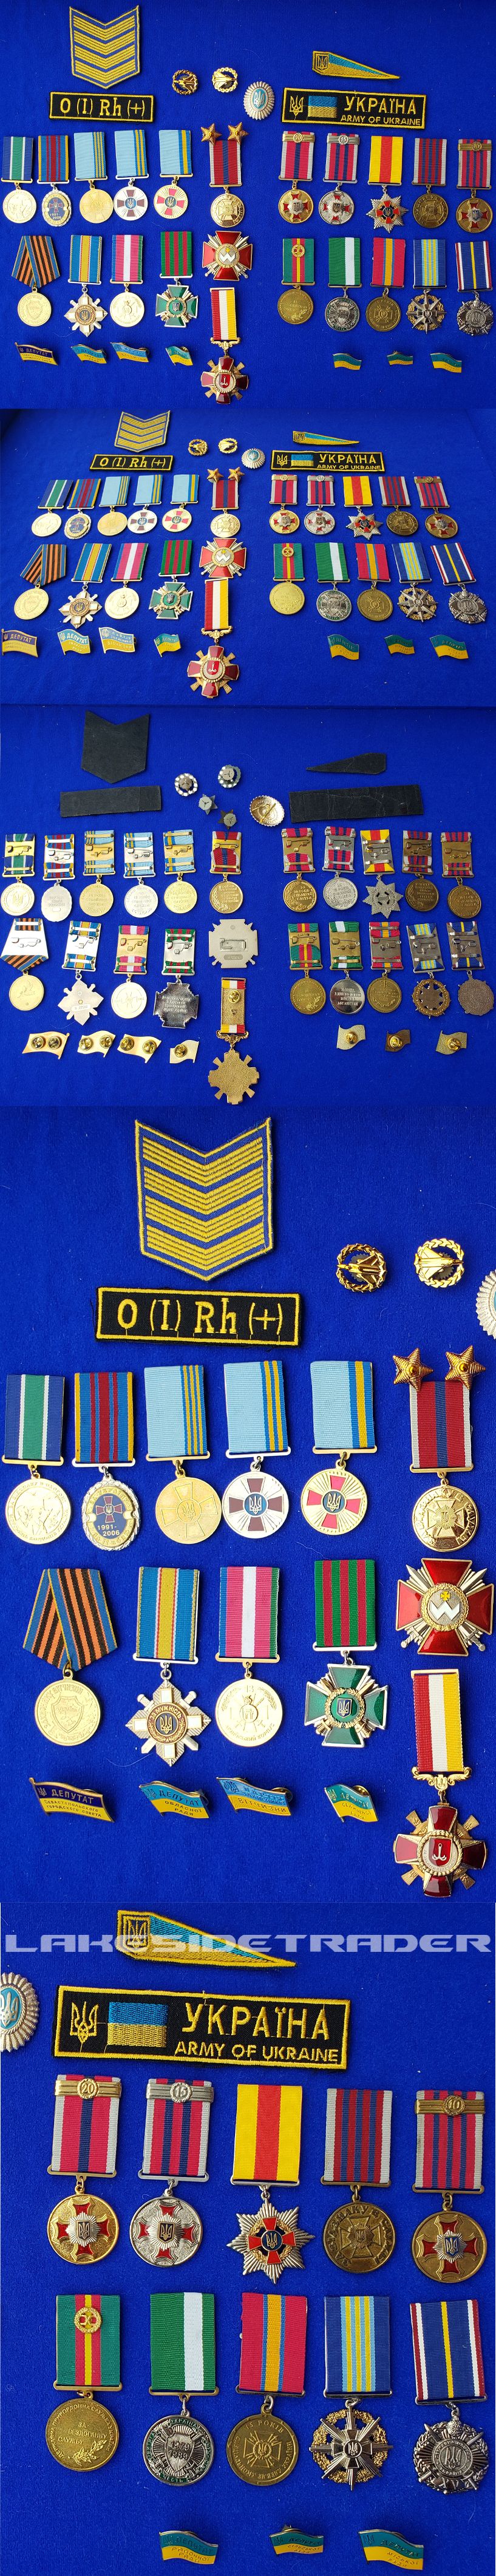 My Ukraine Medal/Document Collection